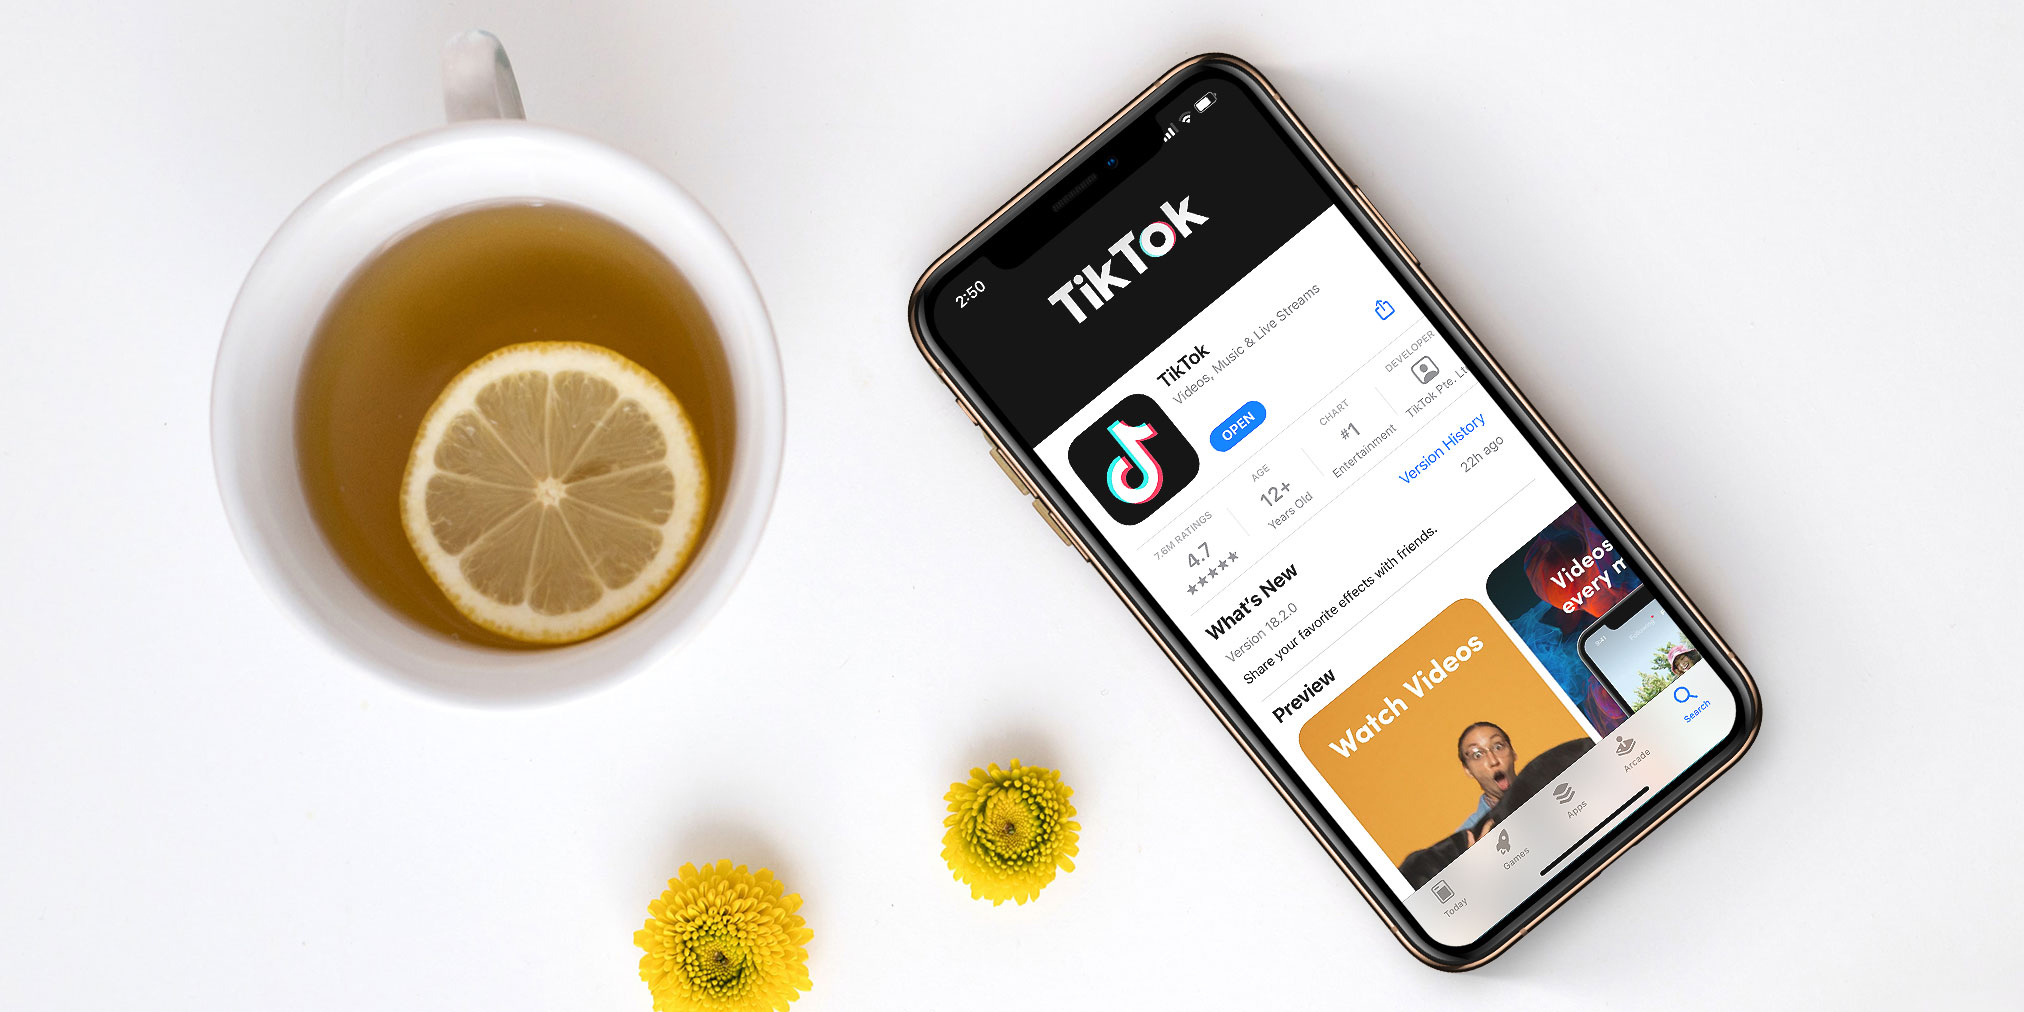 TikTok saw the highest percentage of positive reviews among the top 100 most downloaded U.S. iOS apps in 2020